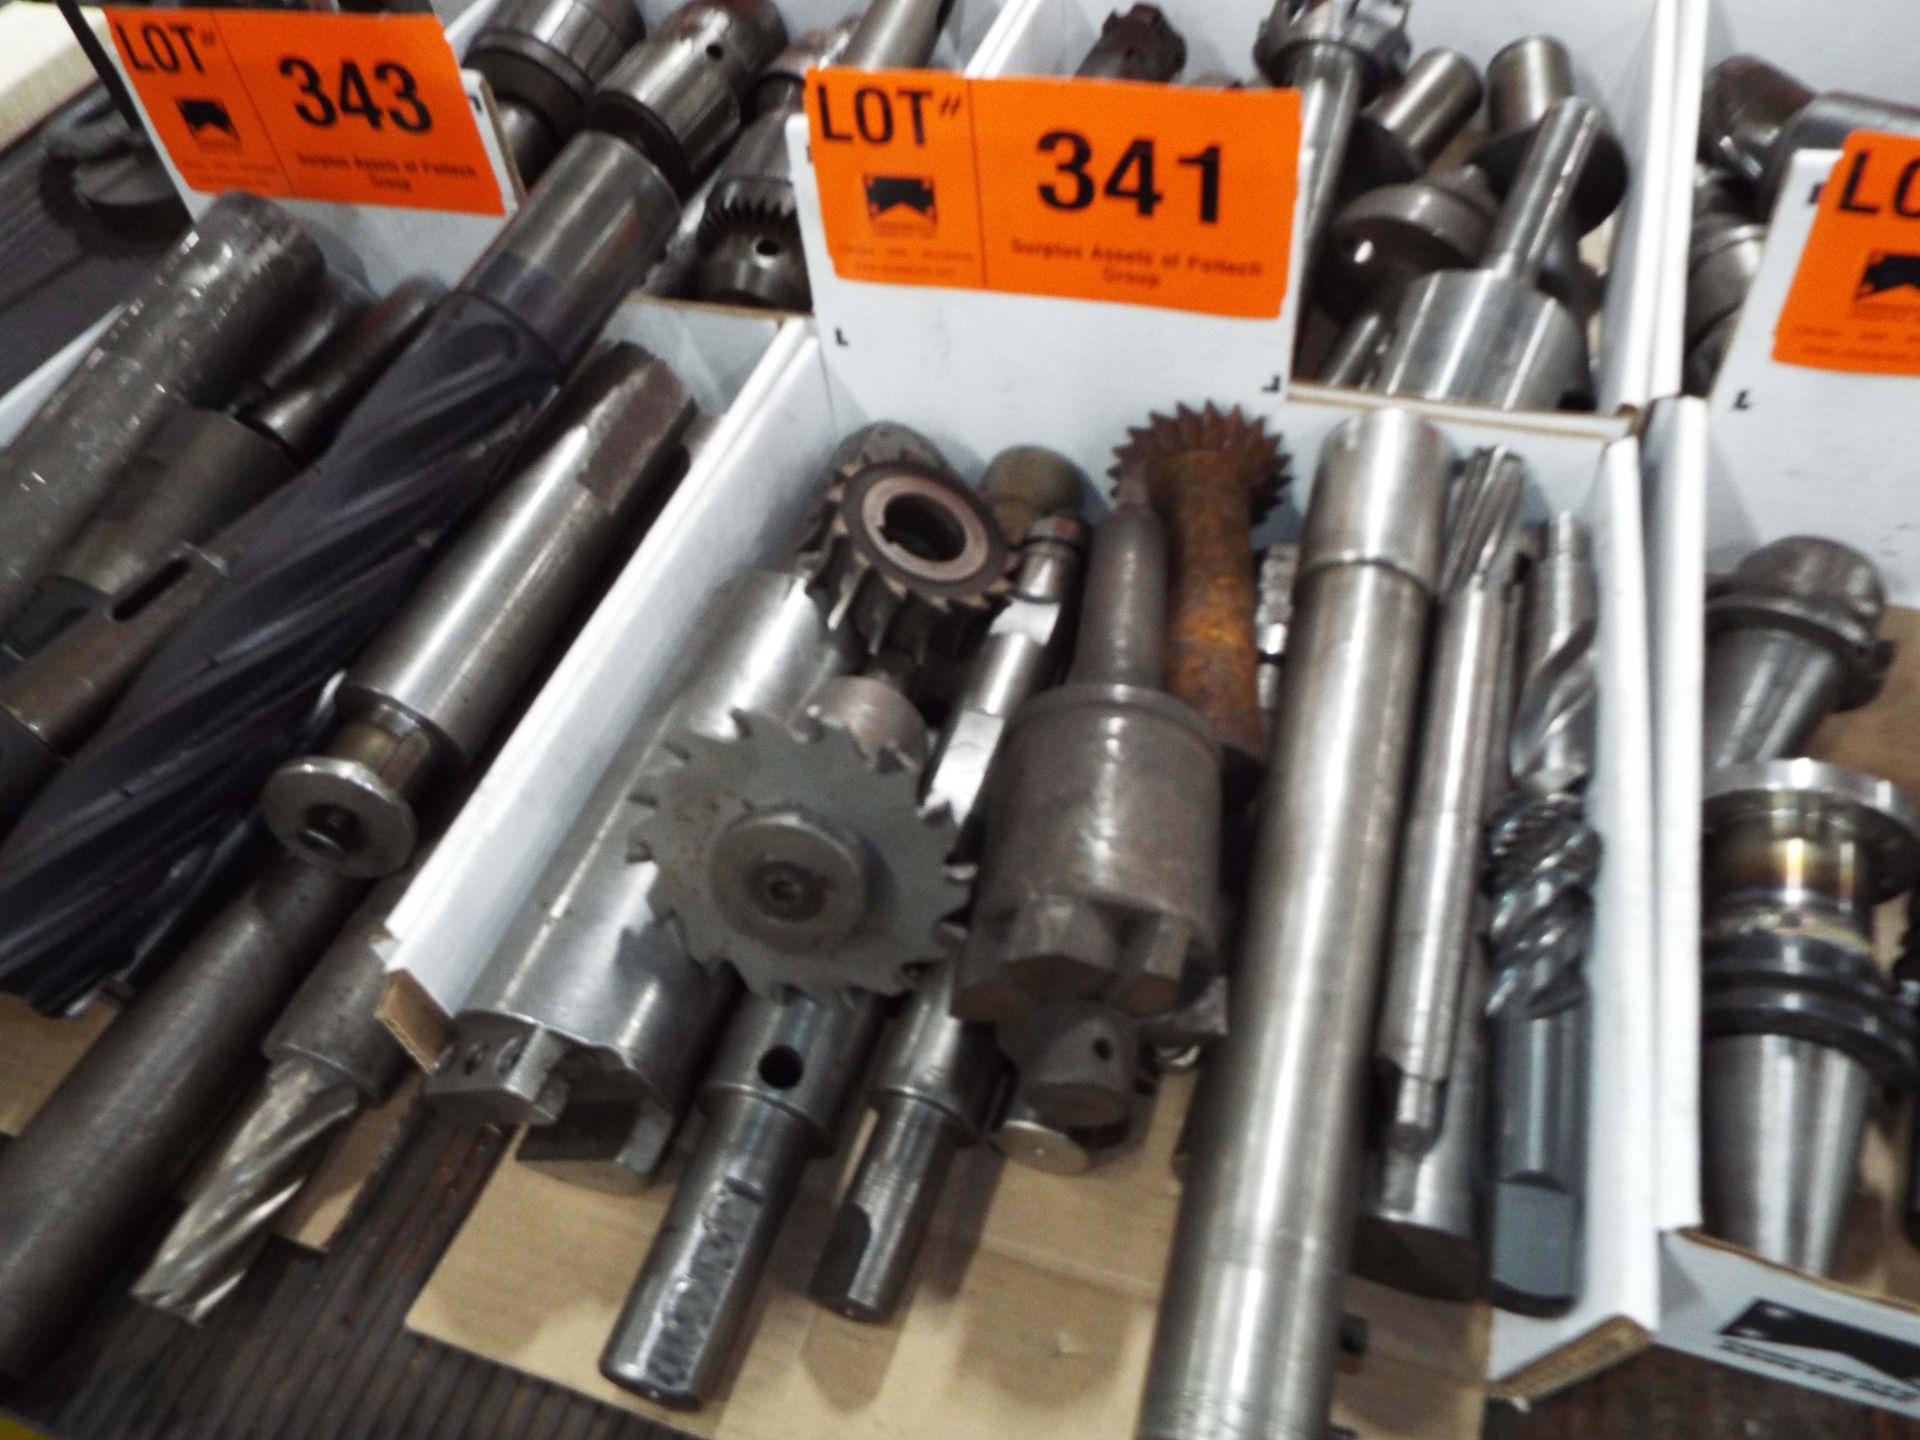 LOT/ PERISHABLE TOOLING - END MILLS, CUTTERS, REAMERS, BORING BARS (LOCATED AT 241 TORYORK DRIVE,